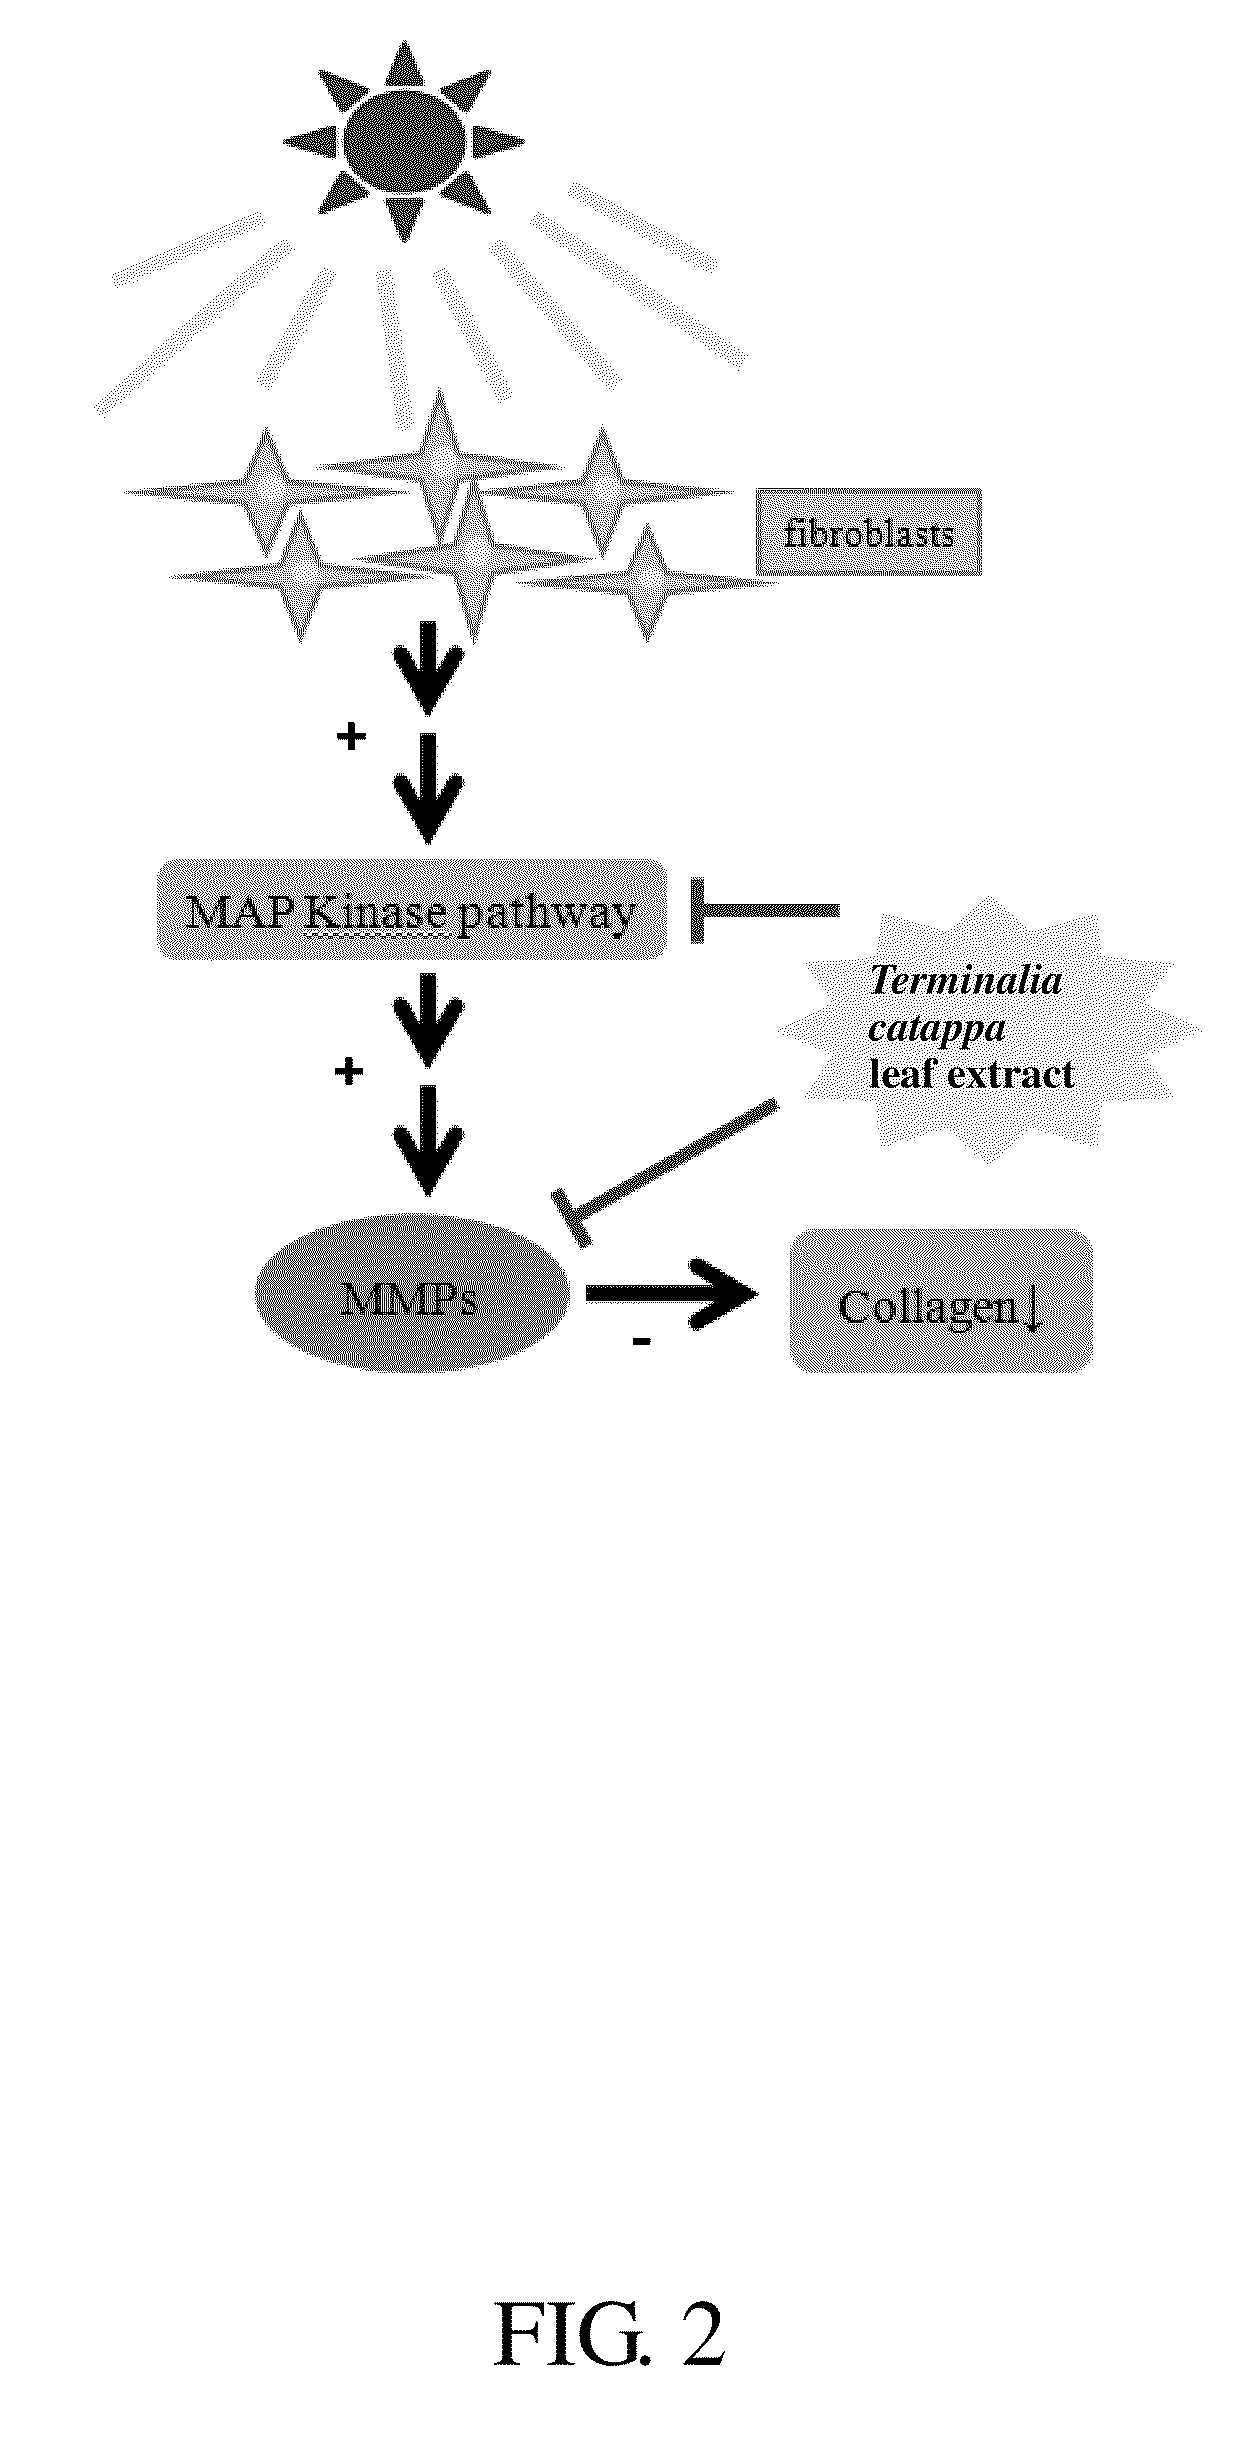 Method for inhibiting activity and/or expression of matrix metalloproteinase, inhibiting phosphorylation of mitogen-activated protein kinase, and/or promoting expression of collagen using terminalia catappa leaf extract